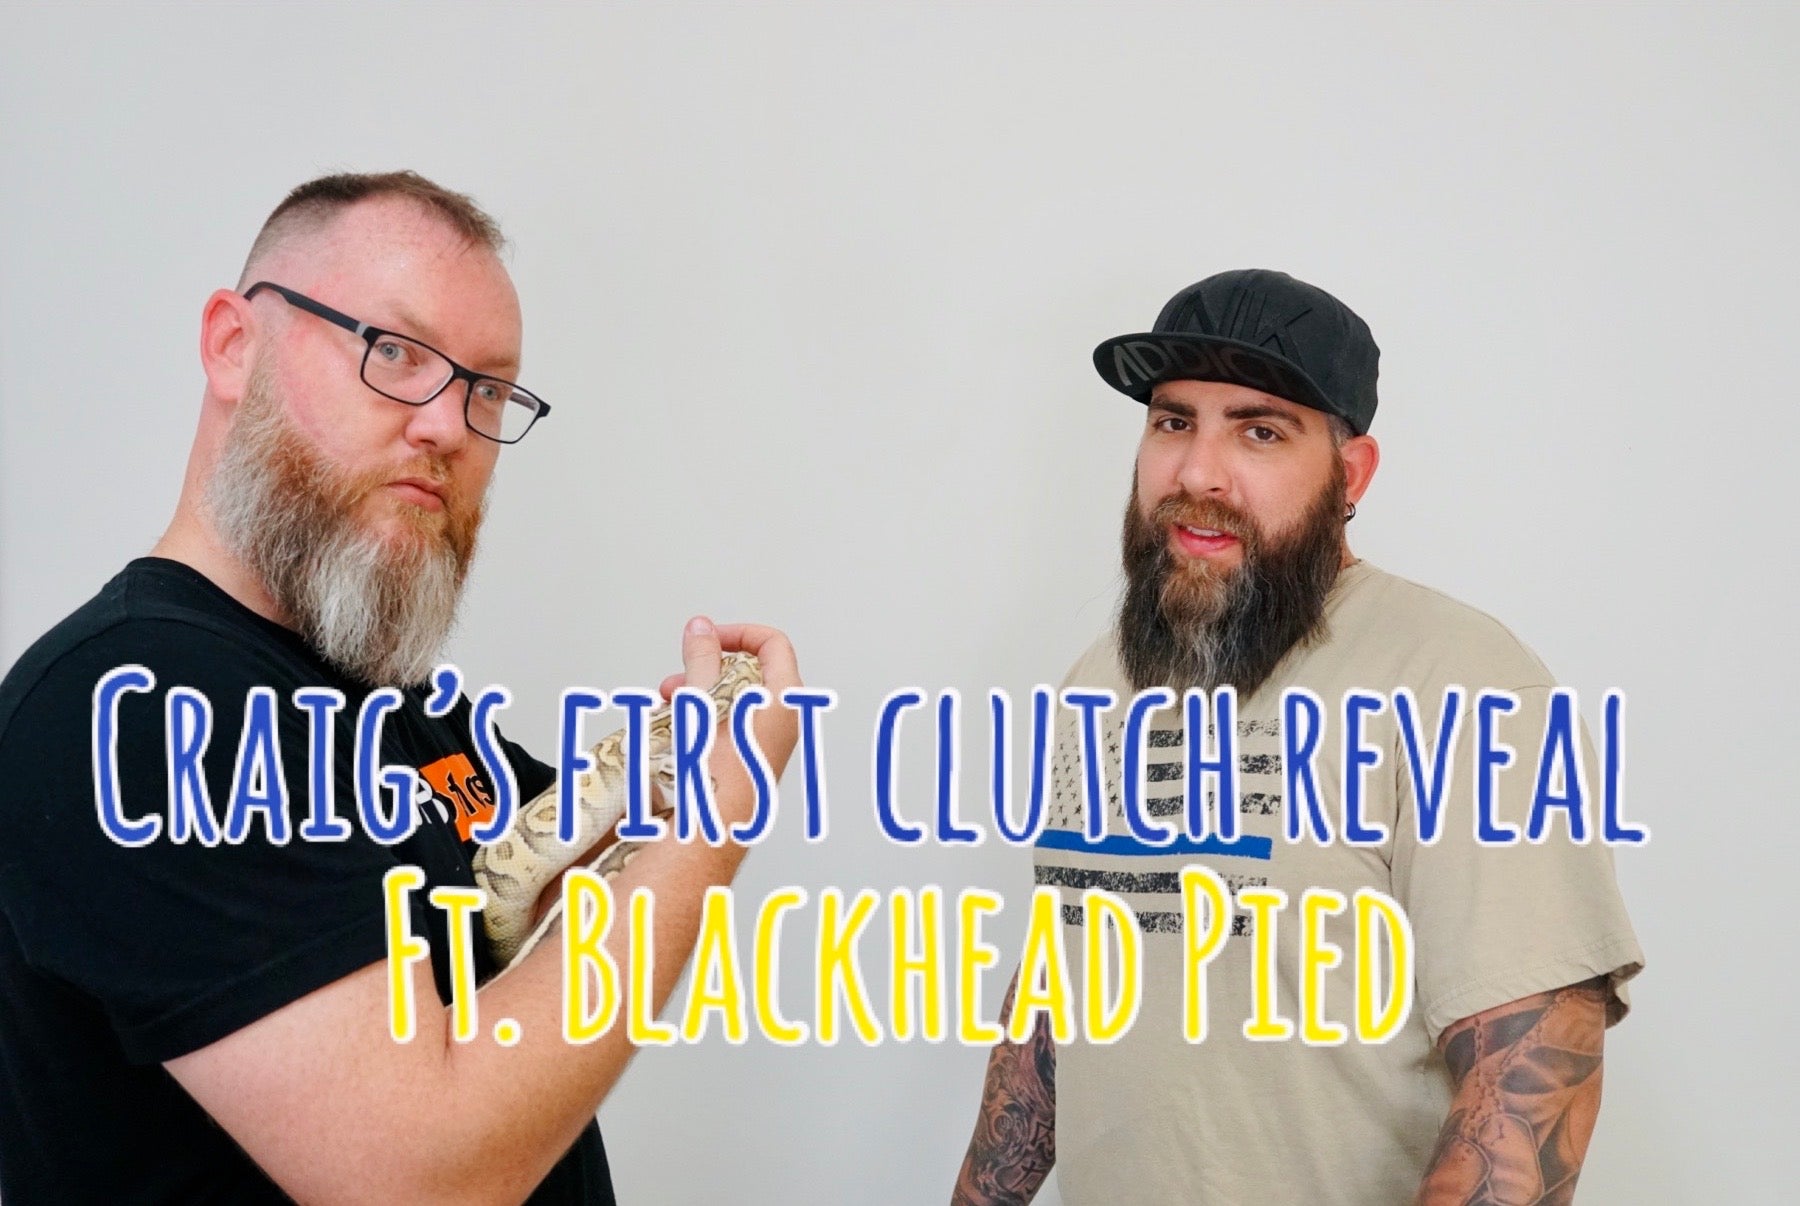 Craig's first clutch reveal - special guest Blackhead Pied